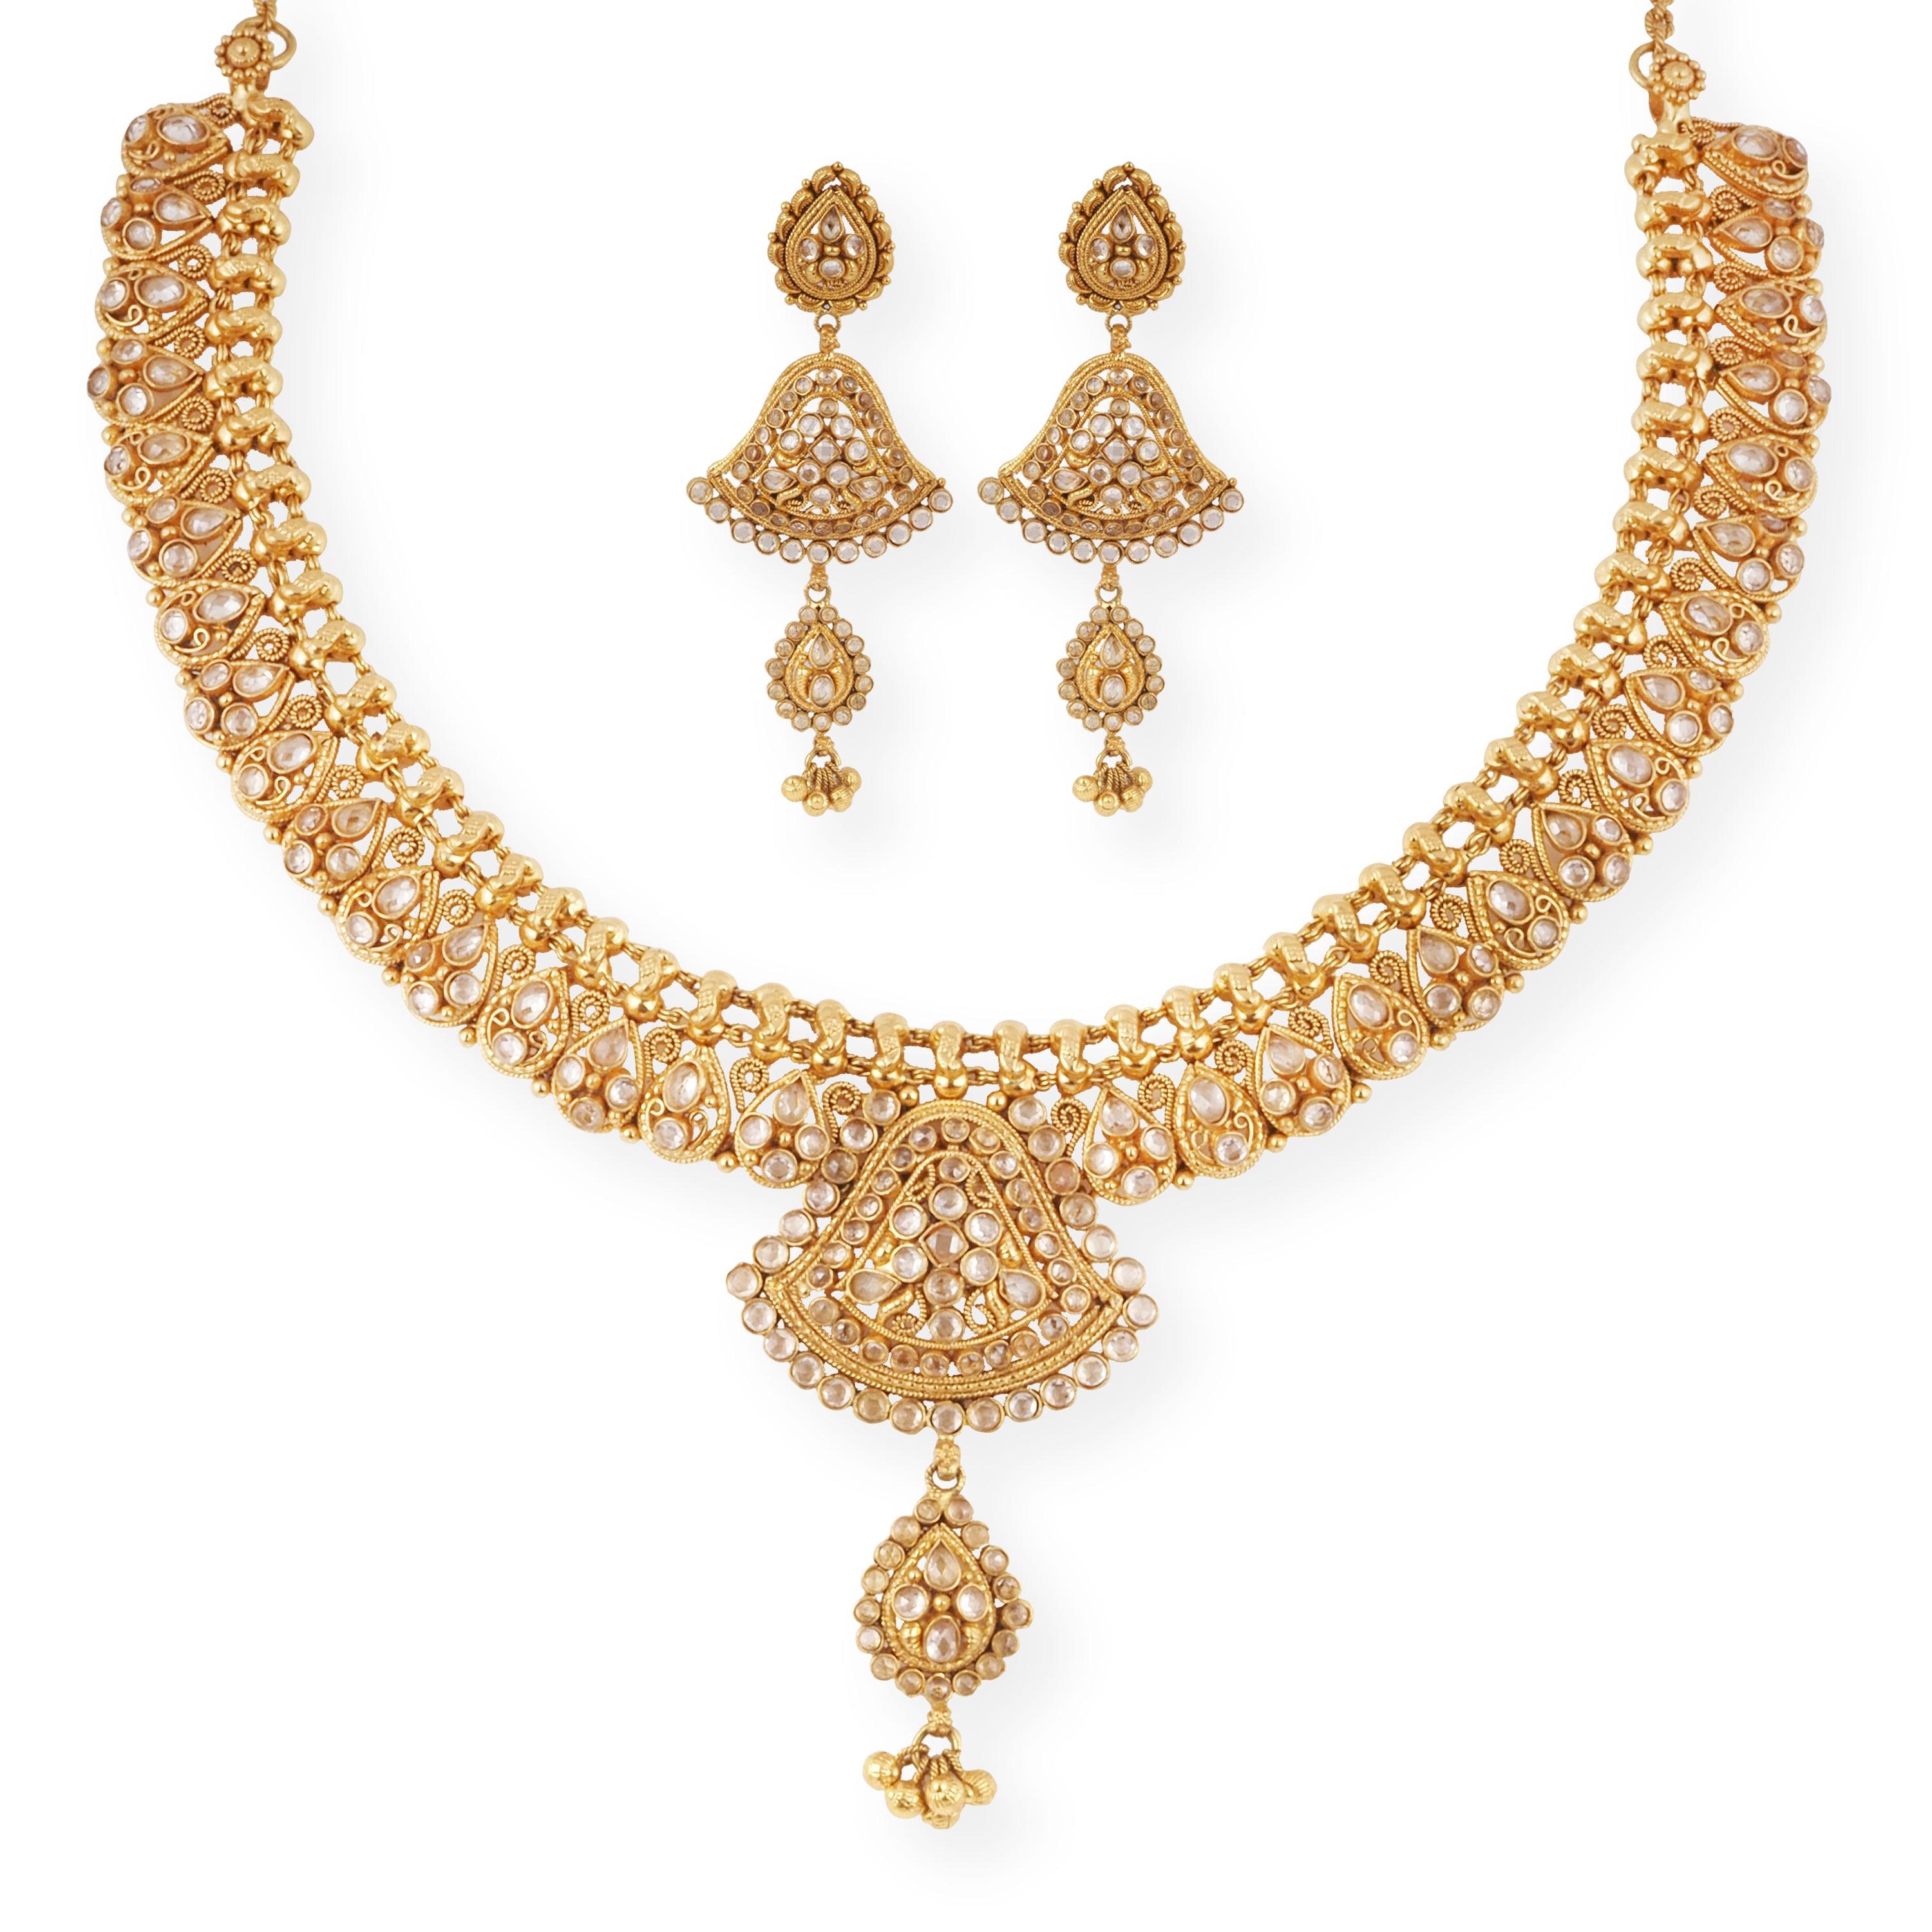 22ct Gold Antiquated Look Design Necklace with Cubic Zirconia Stones & Hook Clasp-8608 - Minar Jewellers